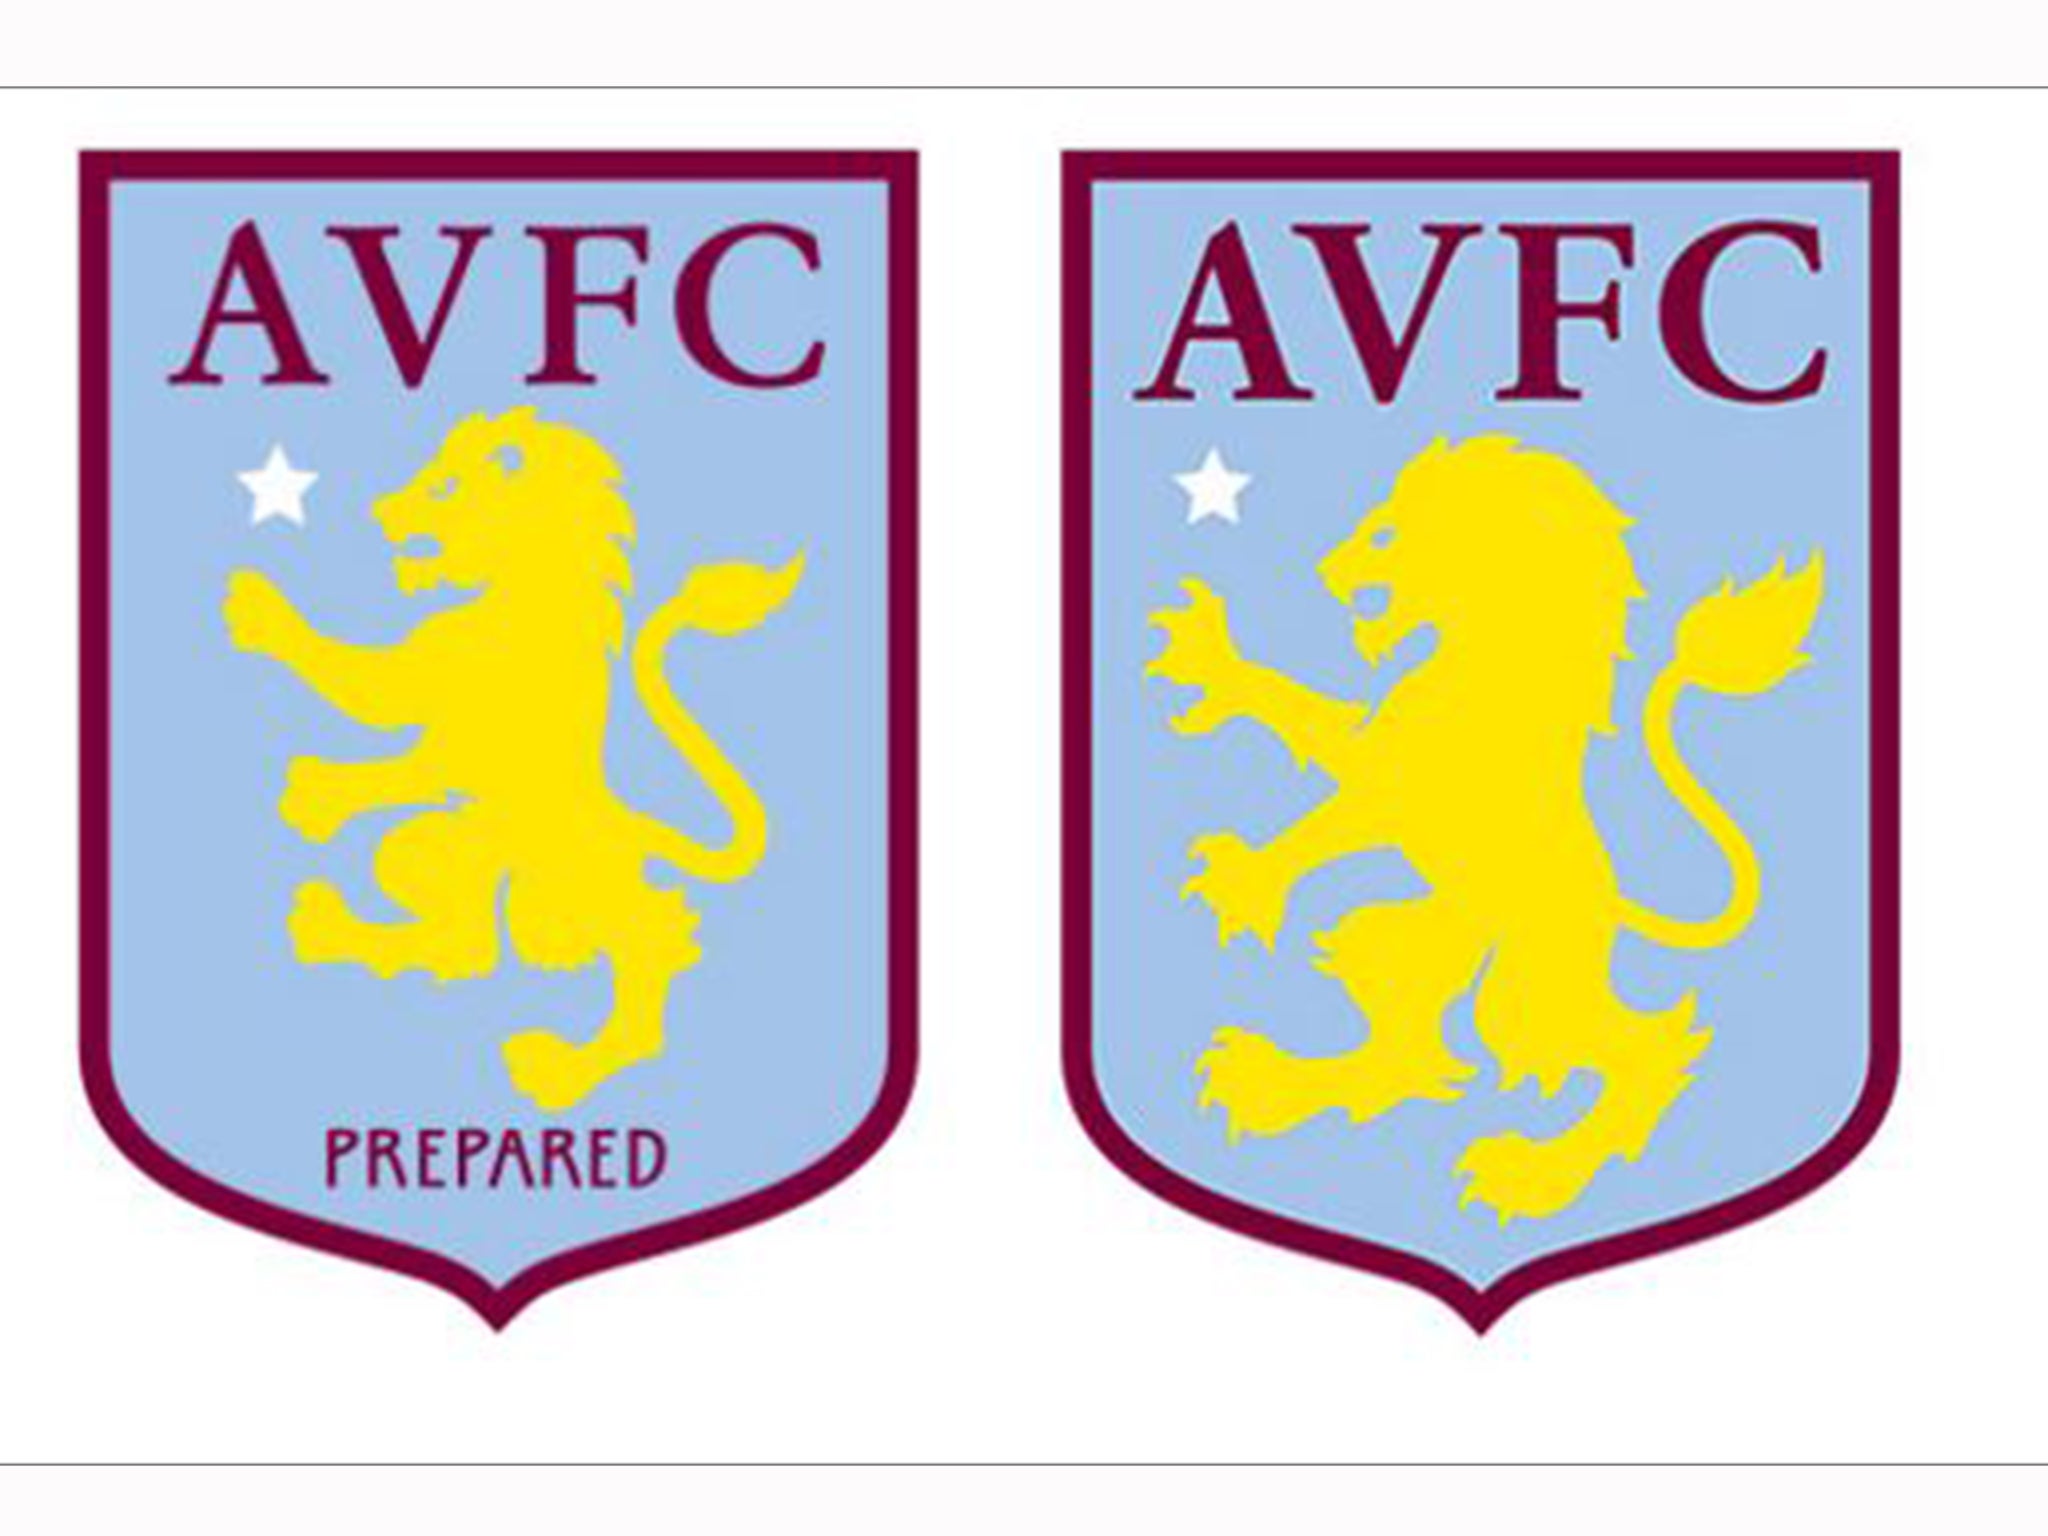 Aston Villa Badge Club Spend 80 000 To Remove The Word Prepared From Crest The Independent The Independent